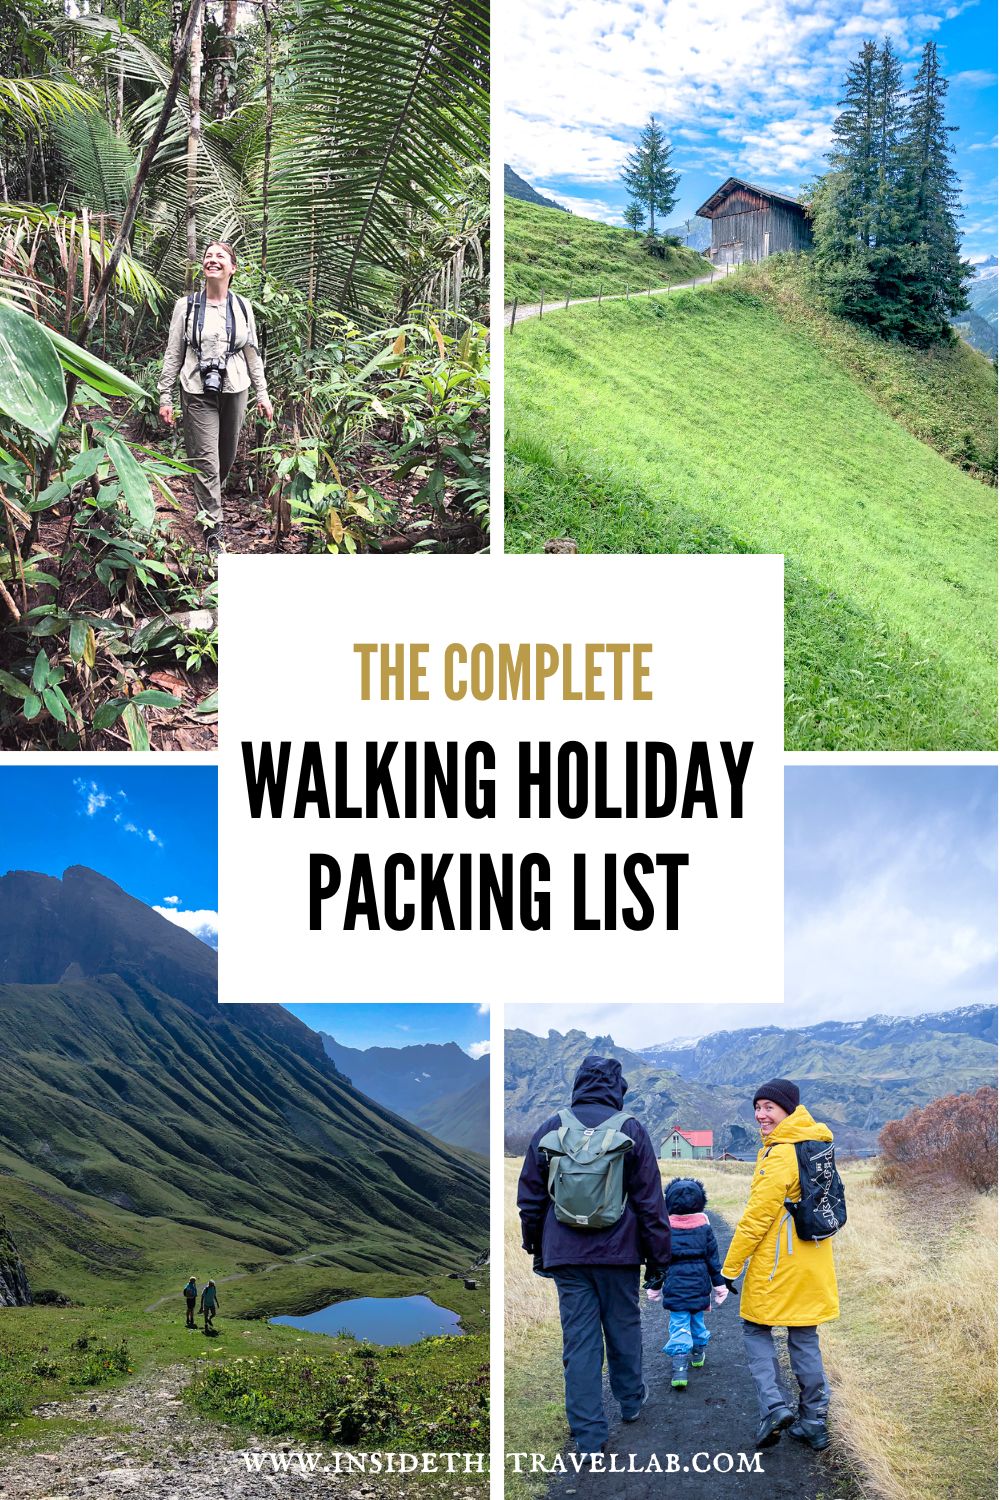 The complete walking holiday packing  list pdf cover image